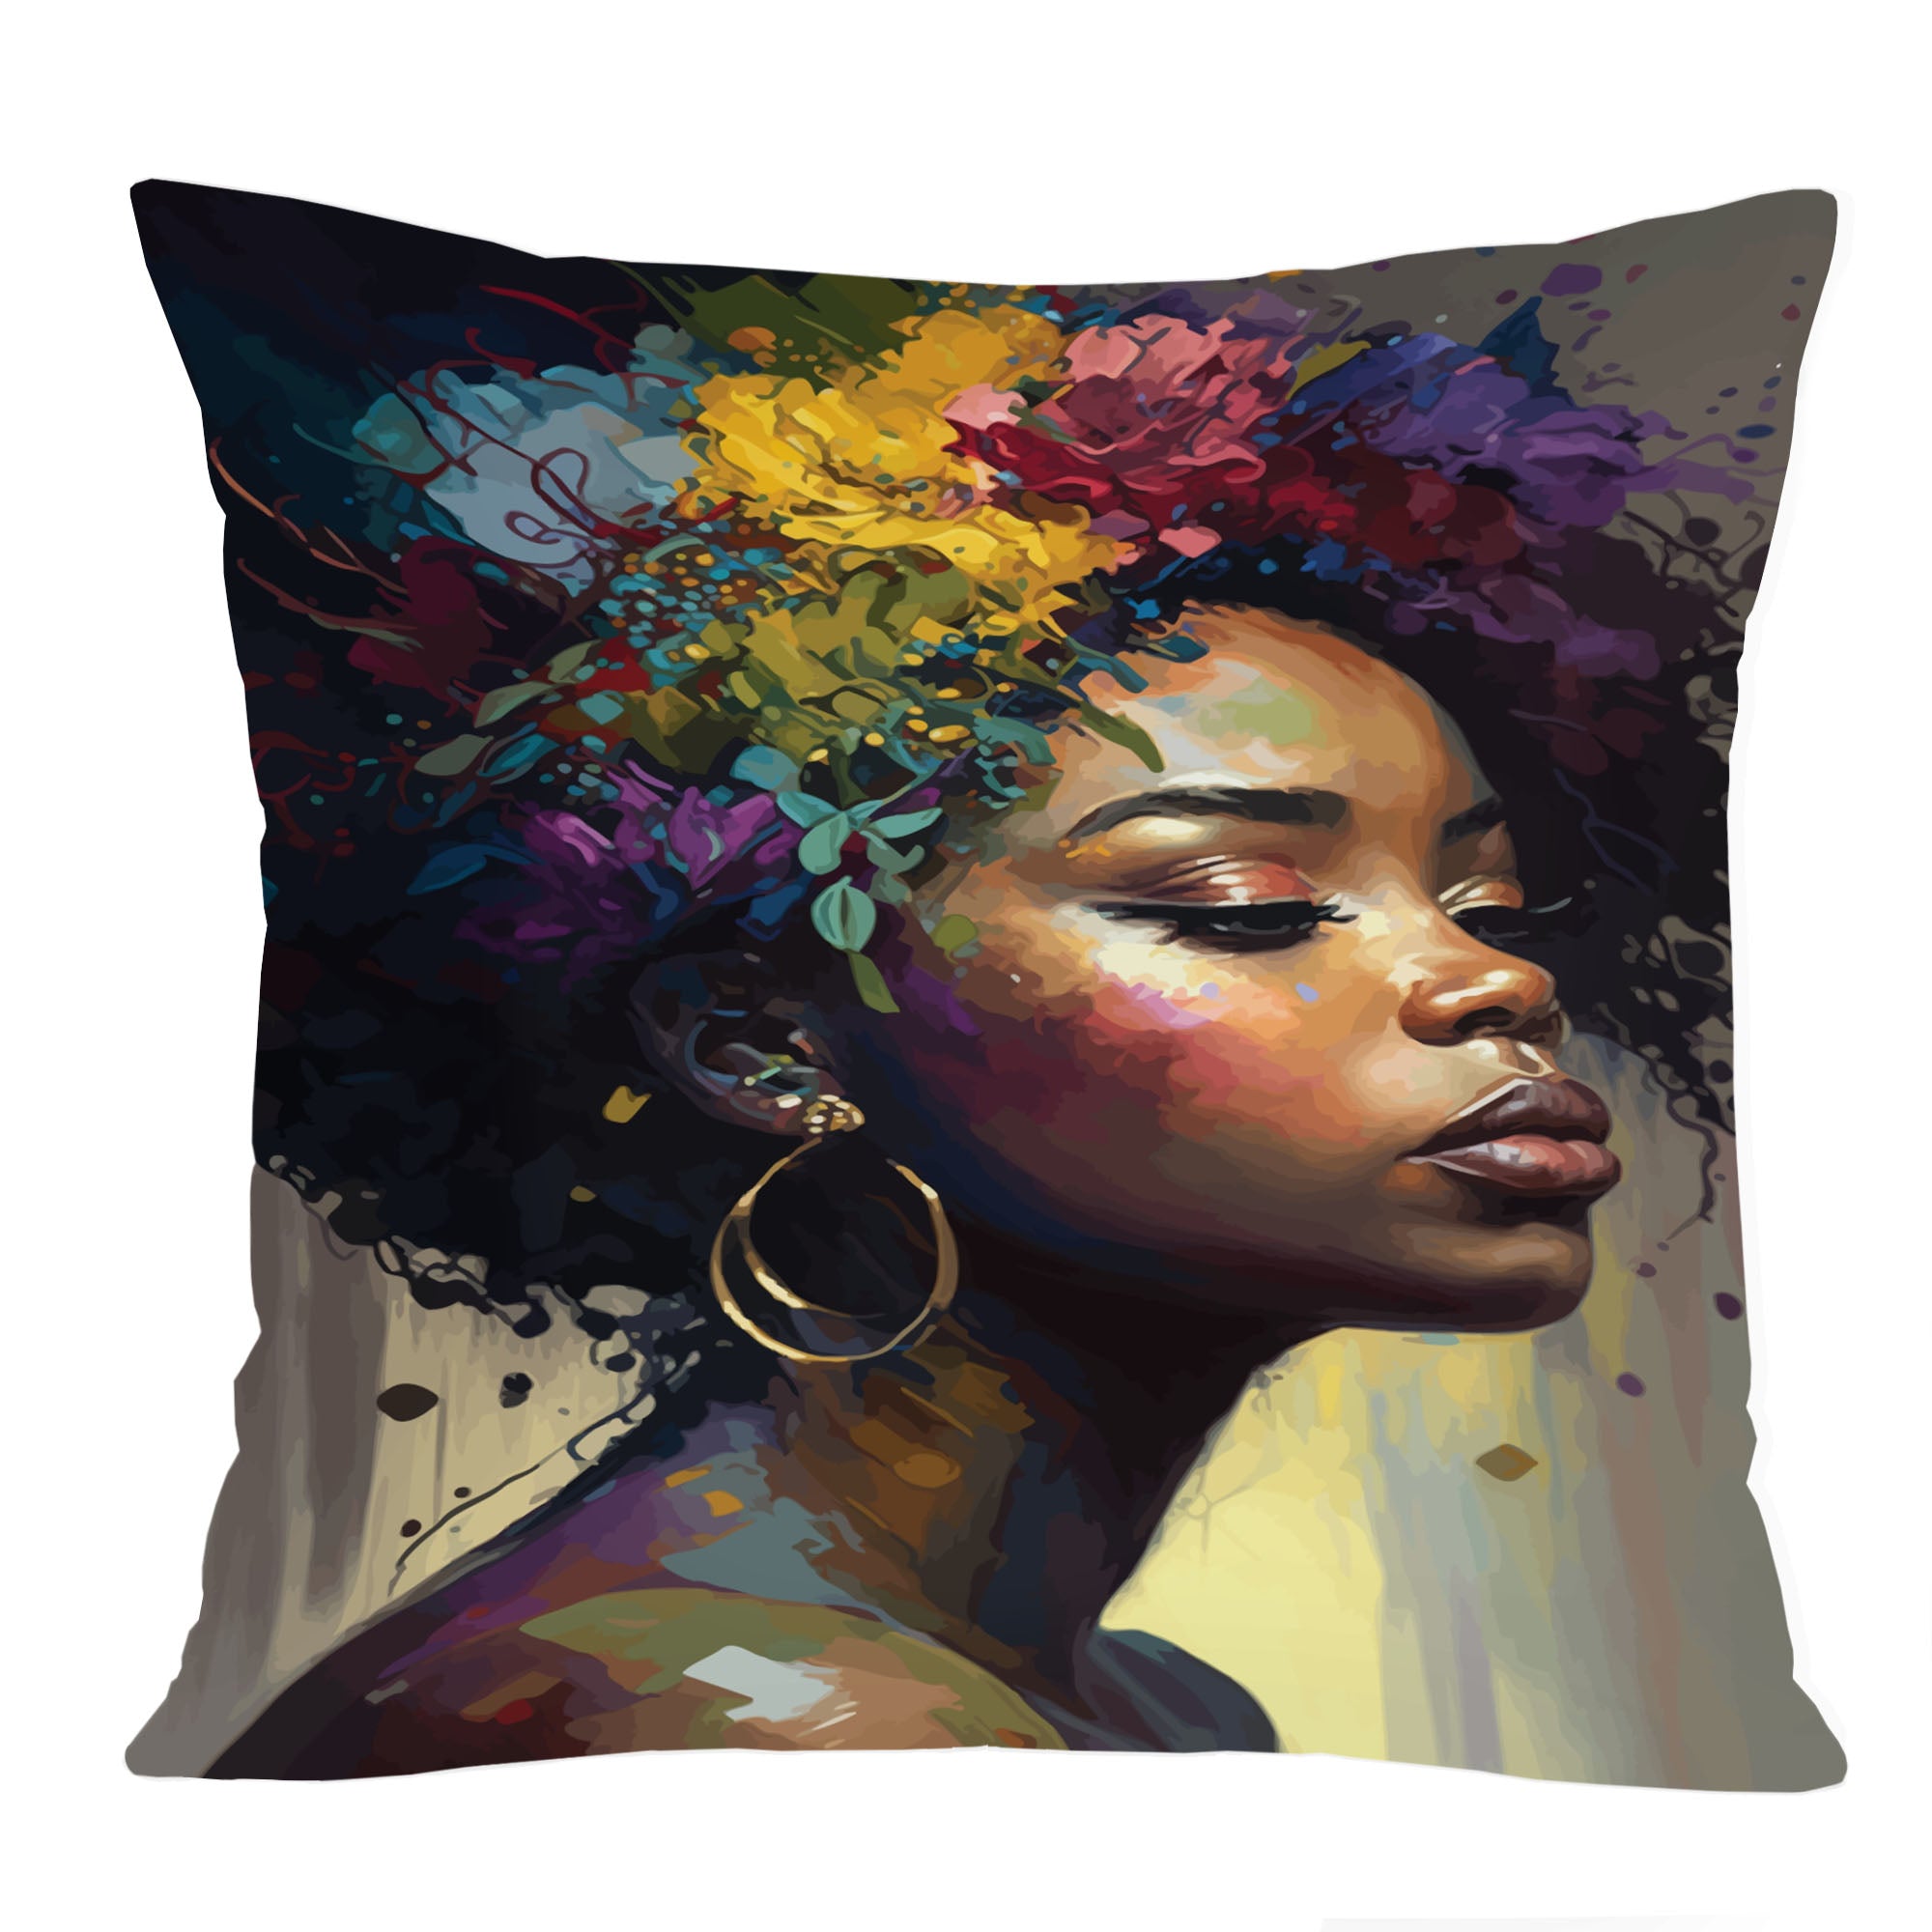 Ethan Taylor People & Portraits Throw Pillow Soft Cushion Cover 'Black Woman Portrait, African American Art Female Portraits' Modern Decorative Square Accent Pillow Case, 16x16 Inches, Brown, Green - image 1 of 5